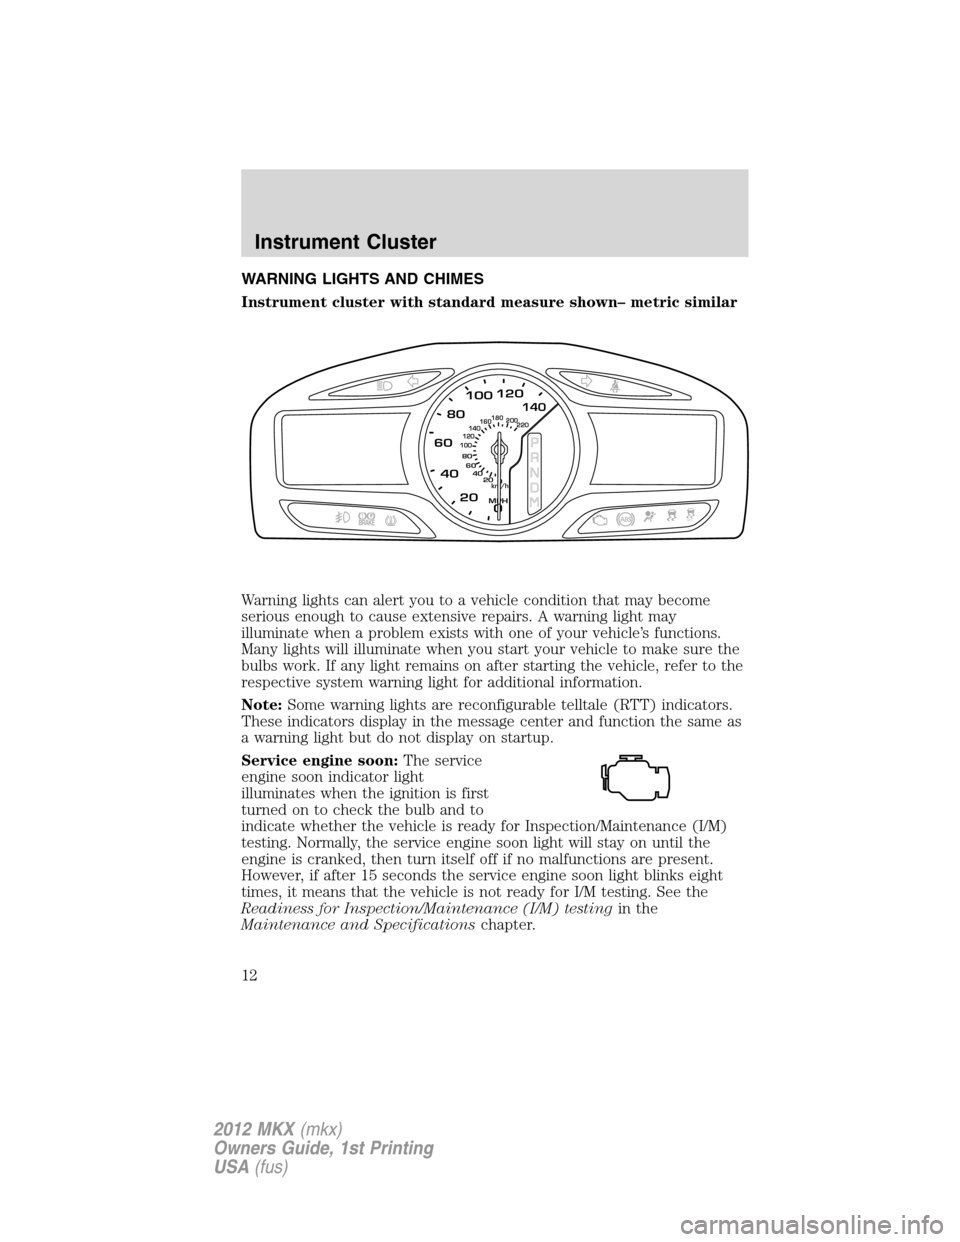 LINCOLN MKX 2012  Owners Manual WARNING LIGHTS AND CHIMES
Instrument cluster with standard measure shown– metric similar
Warning lights can alert you to a vehicle condition that may become
serious enough to cause extensive repairs